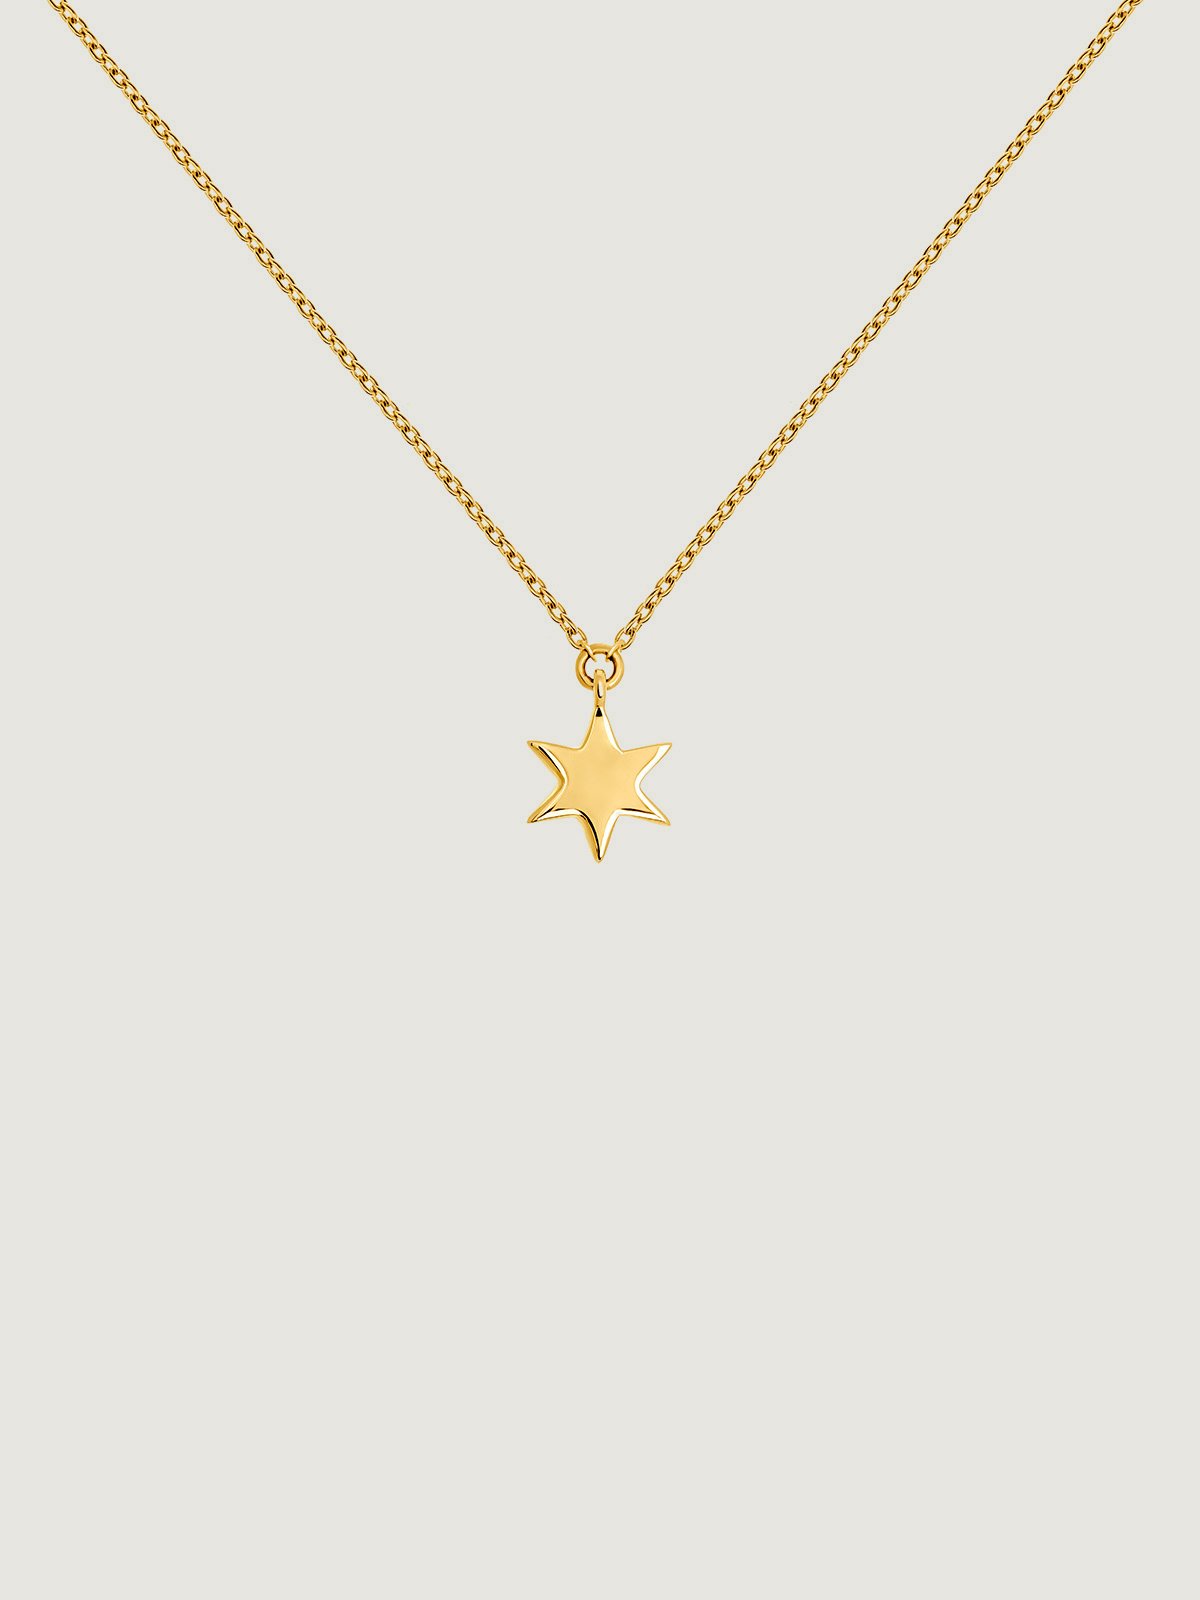 9K Yellow Gold Pendant with Star